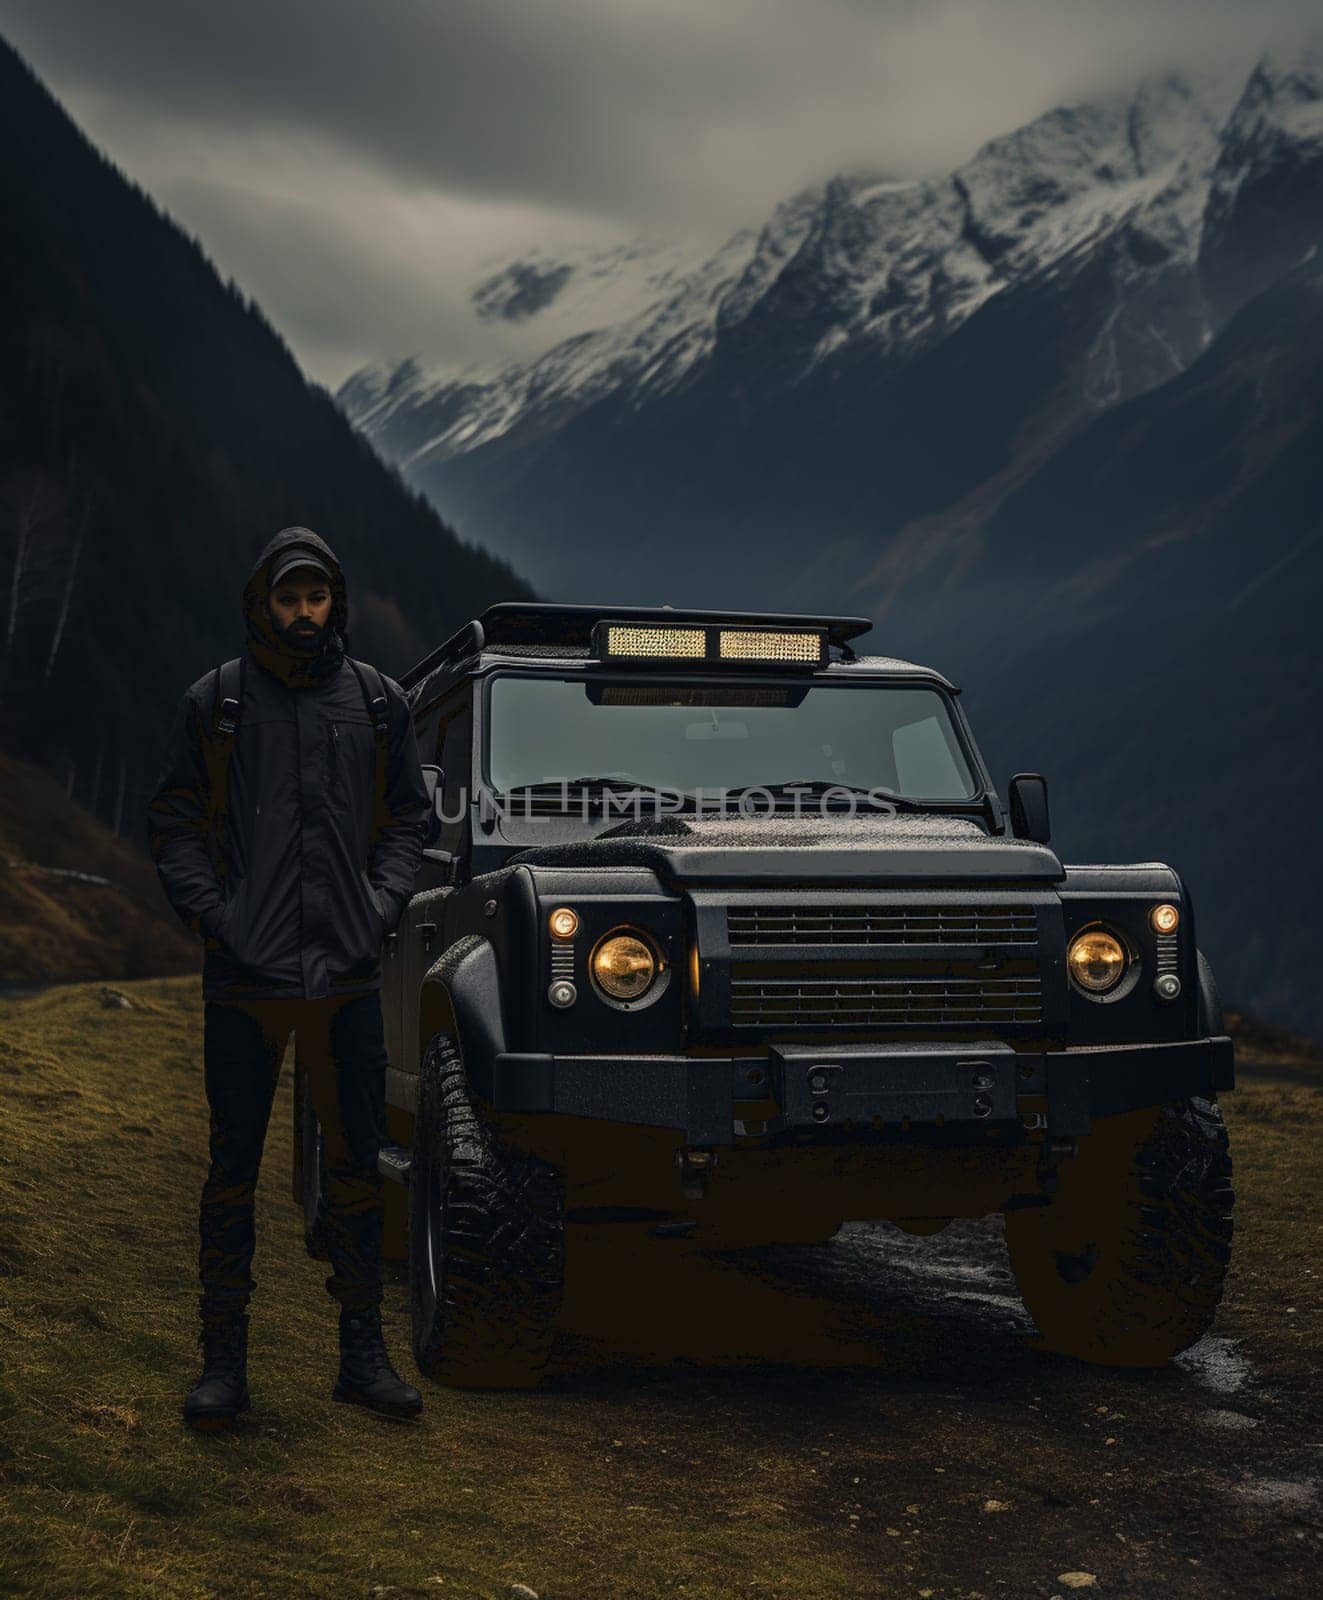 Black off-road truck in the mountains by Andelov13